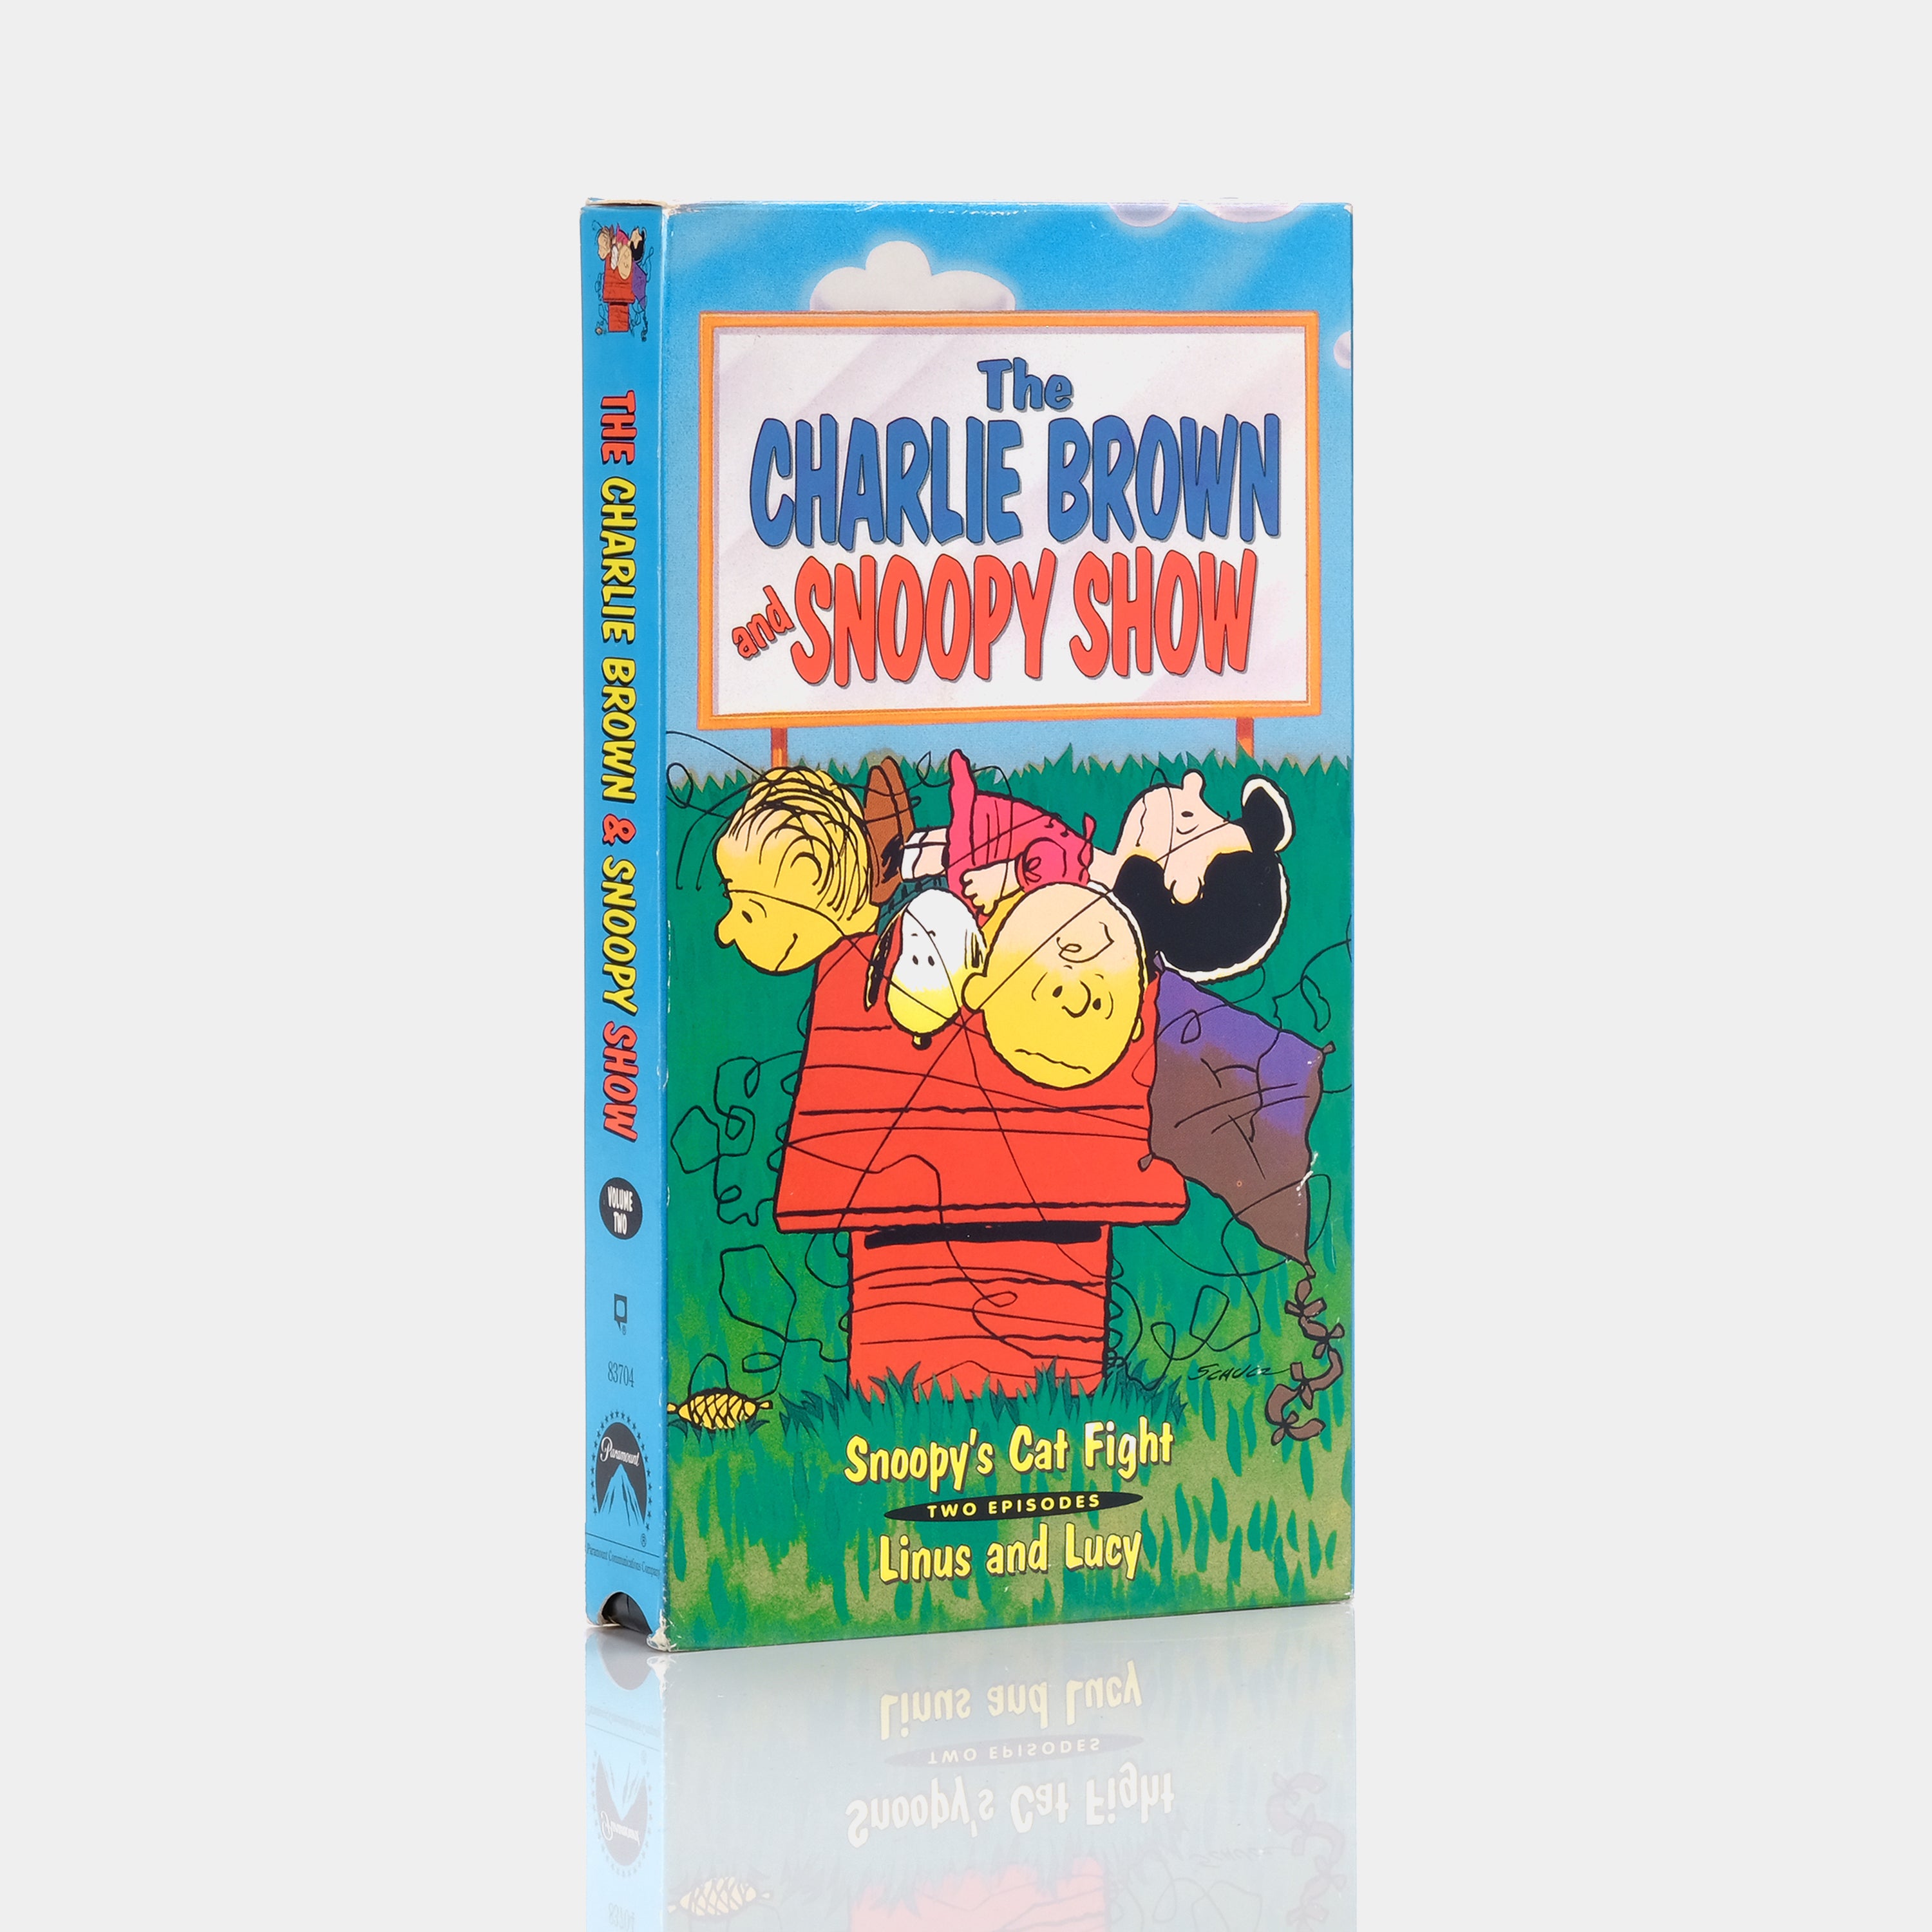 The Charlie Brown And Snoopy Show: Volume Two VHS Tape